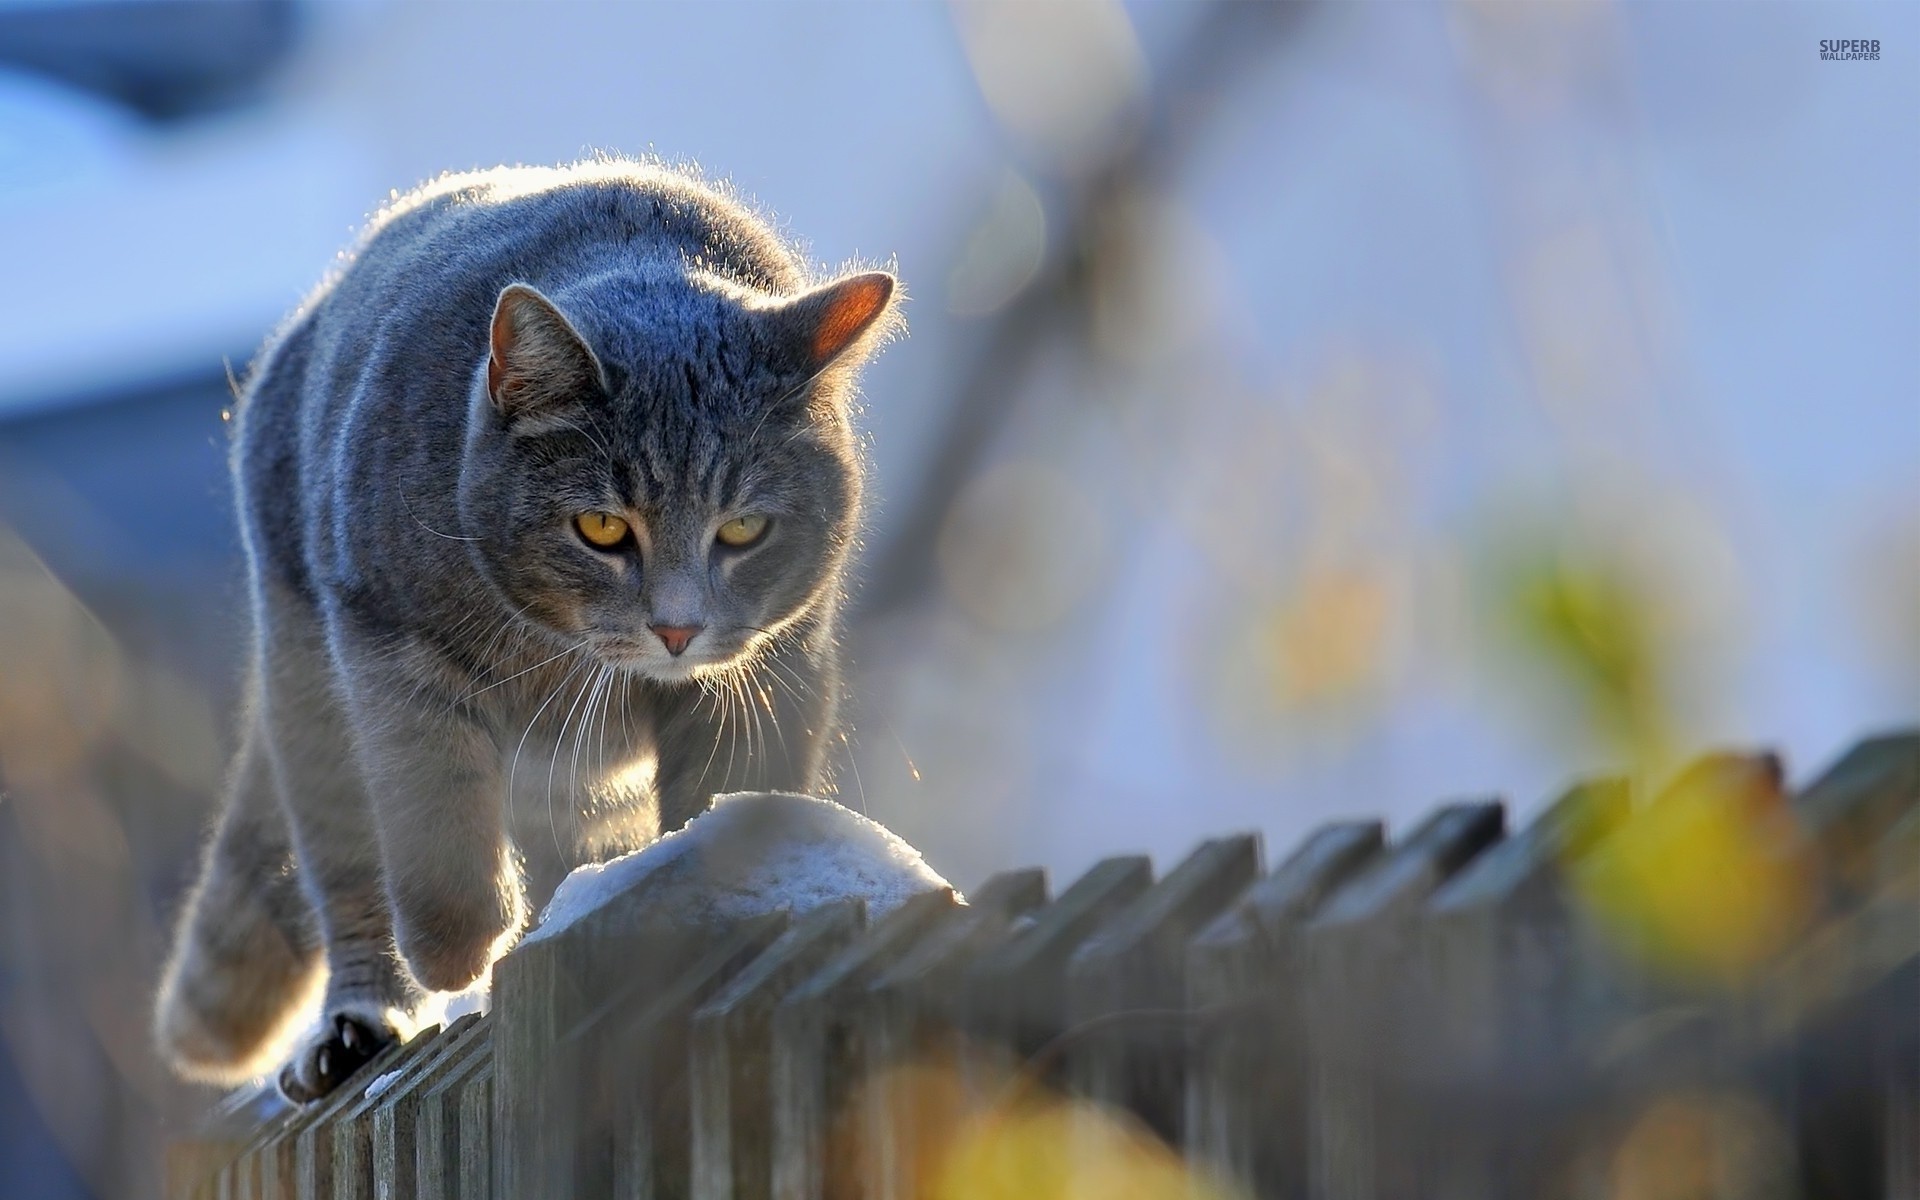 General 1920x1200 animals cats feline mammals fence outdoors closeup whiskers cat eyes sunlight fur wood blurred blurry background